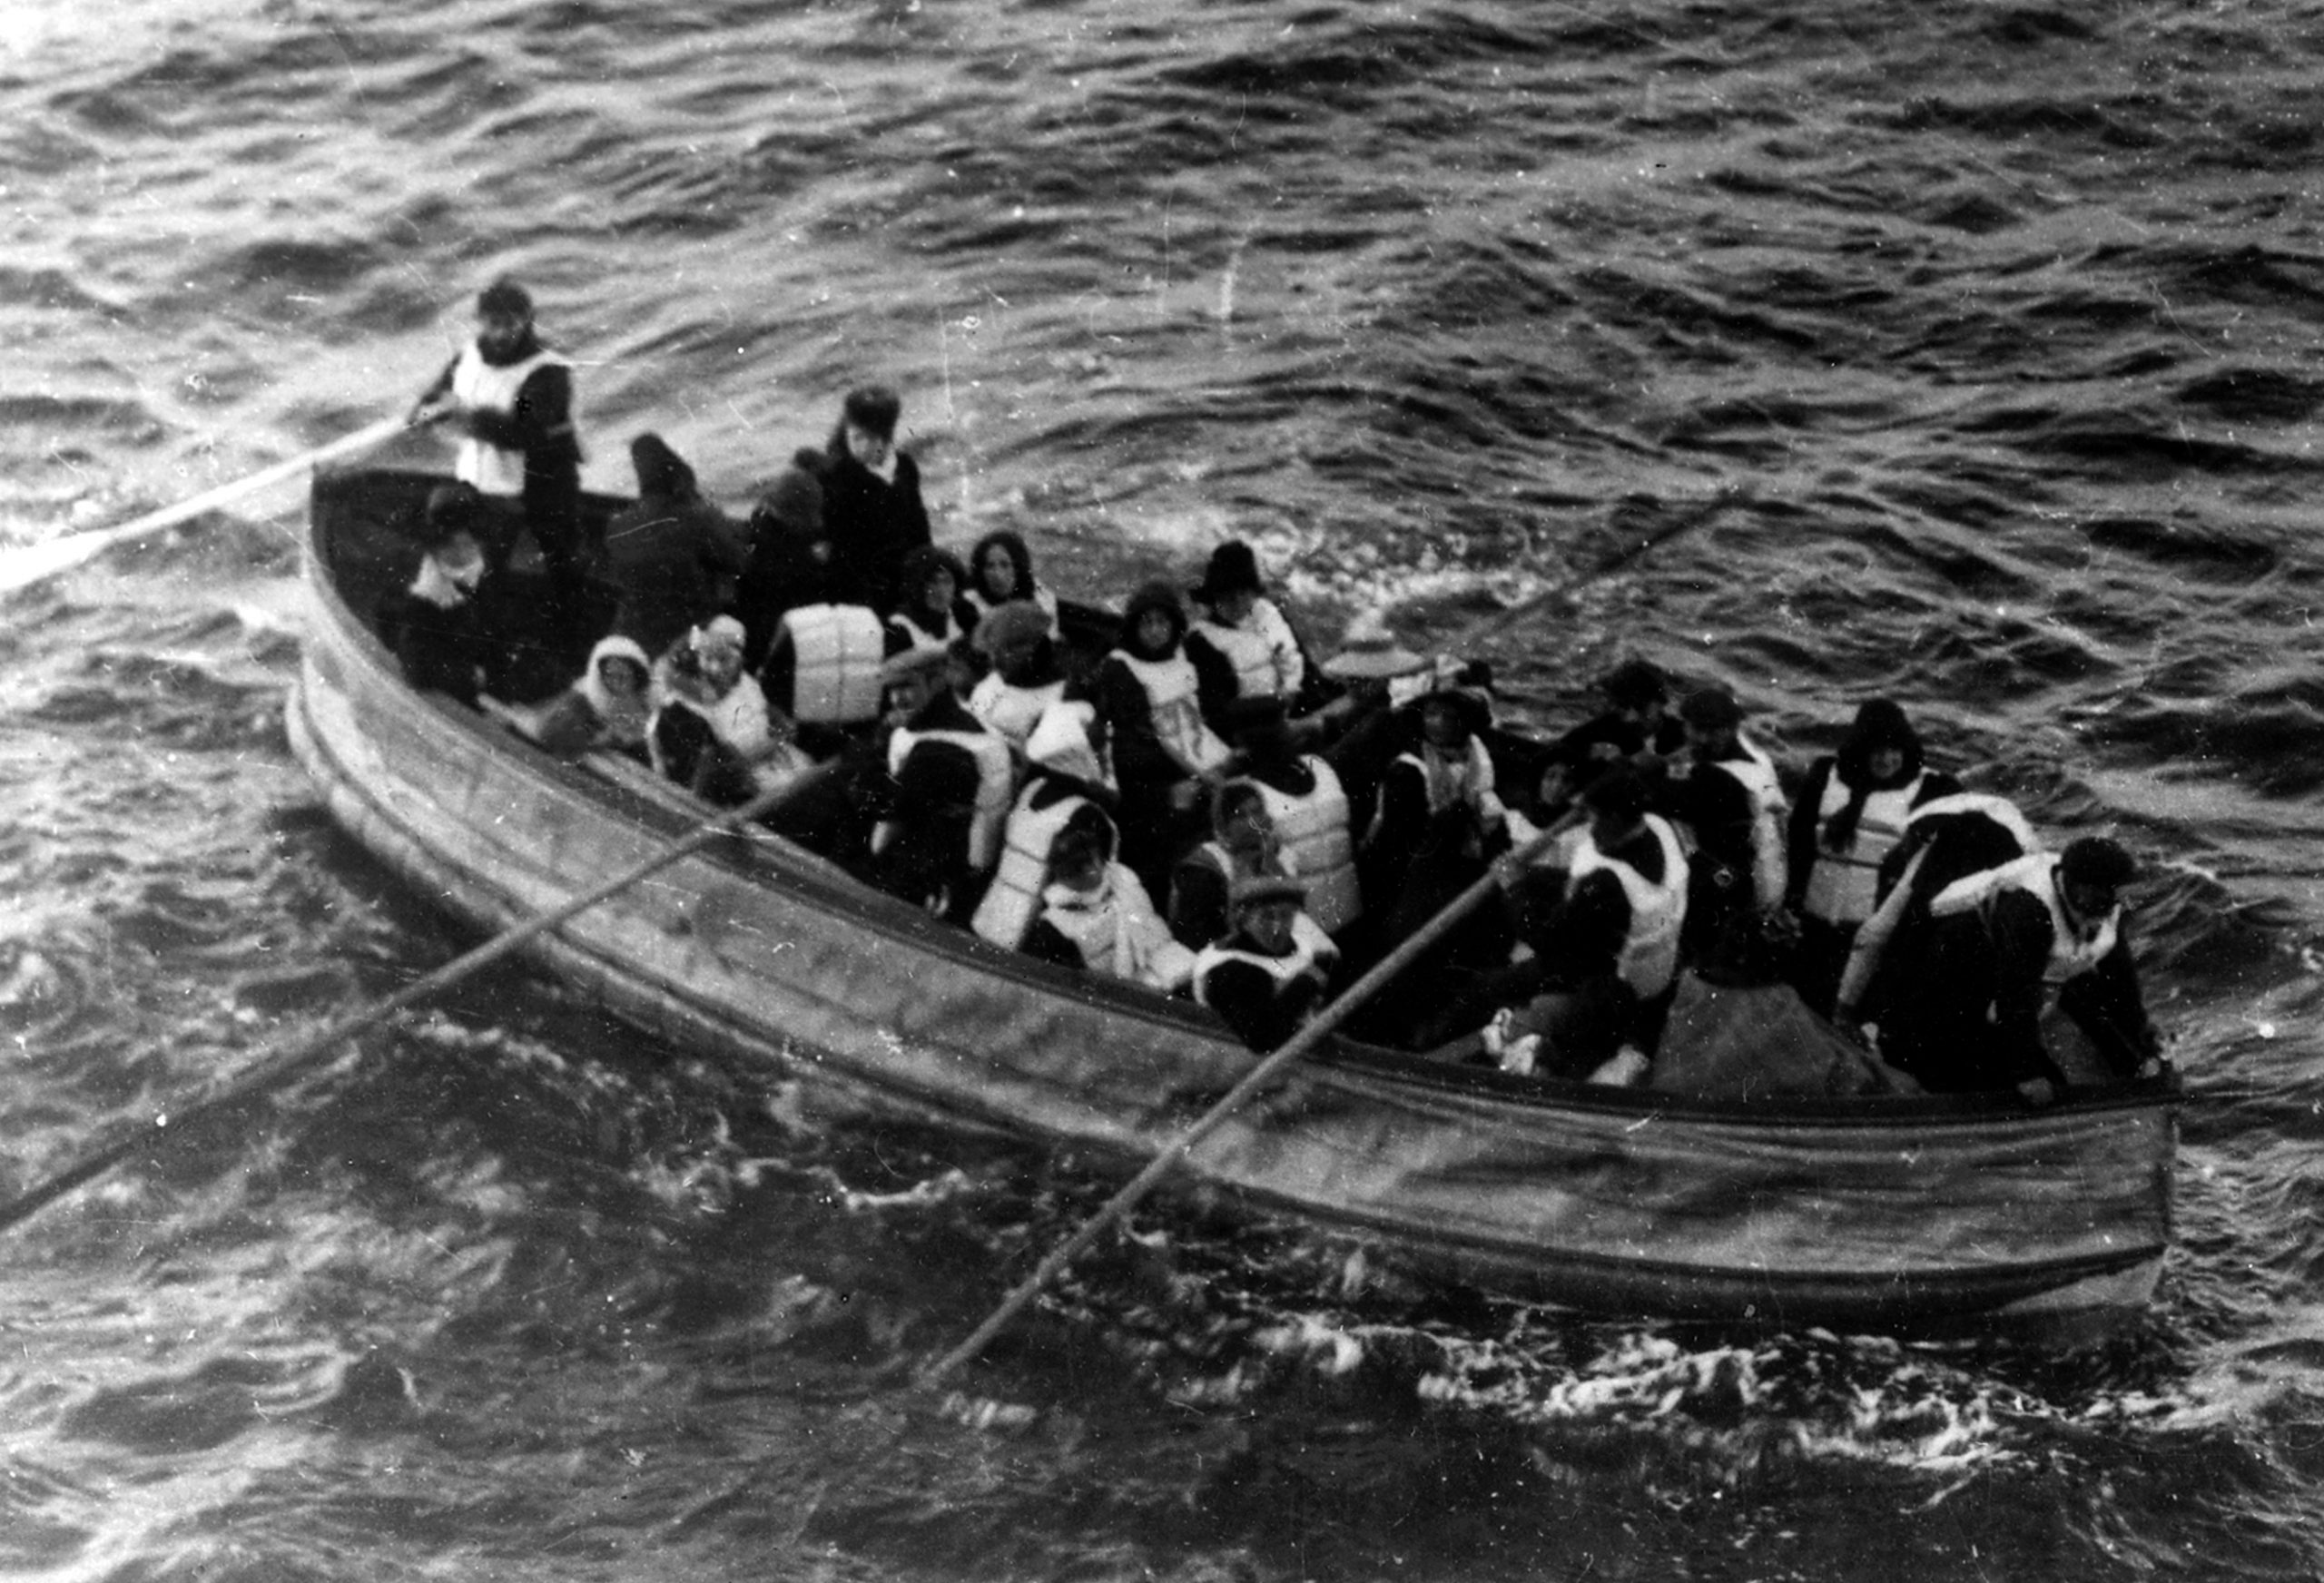 The Titanic: Lifeboats - History